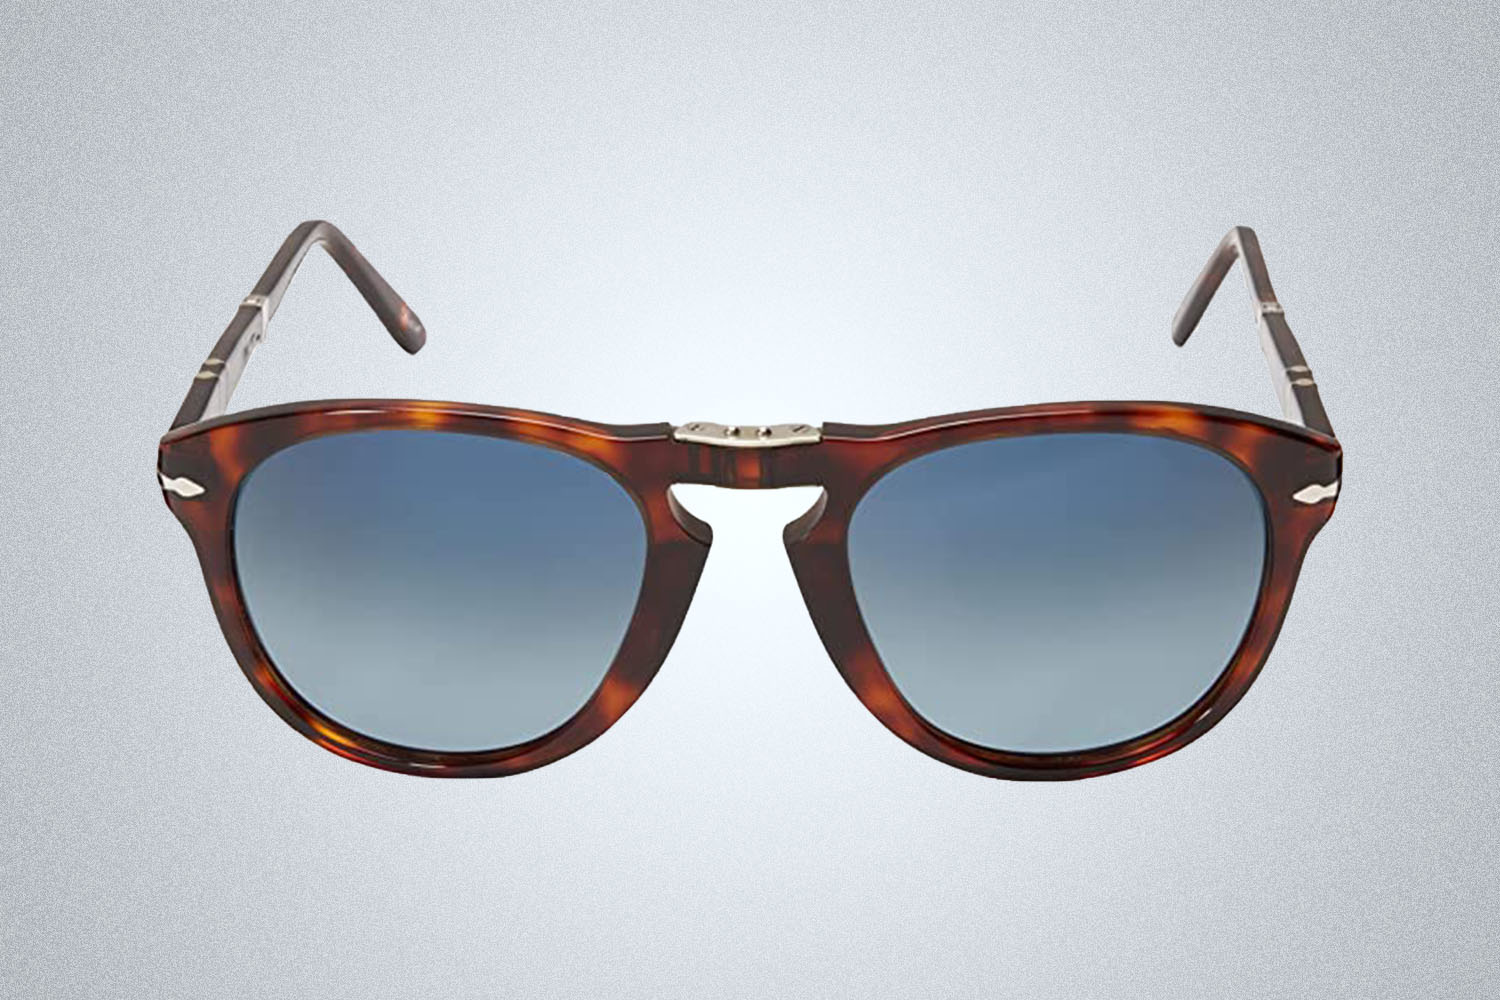 a pair of Persol sunglasses from Amazon on a grey background